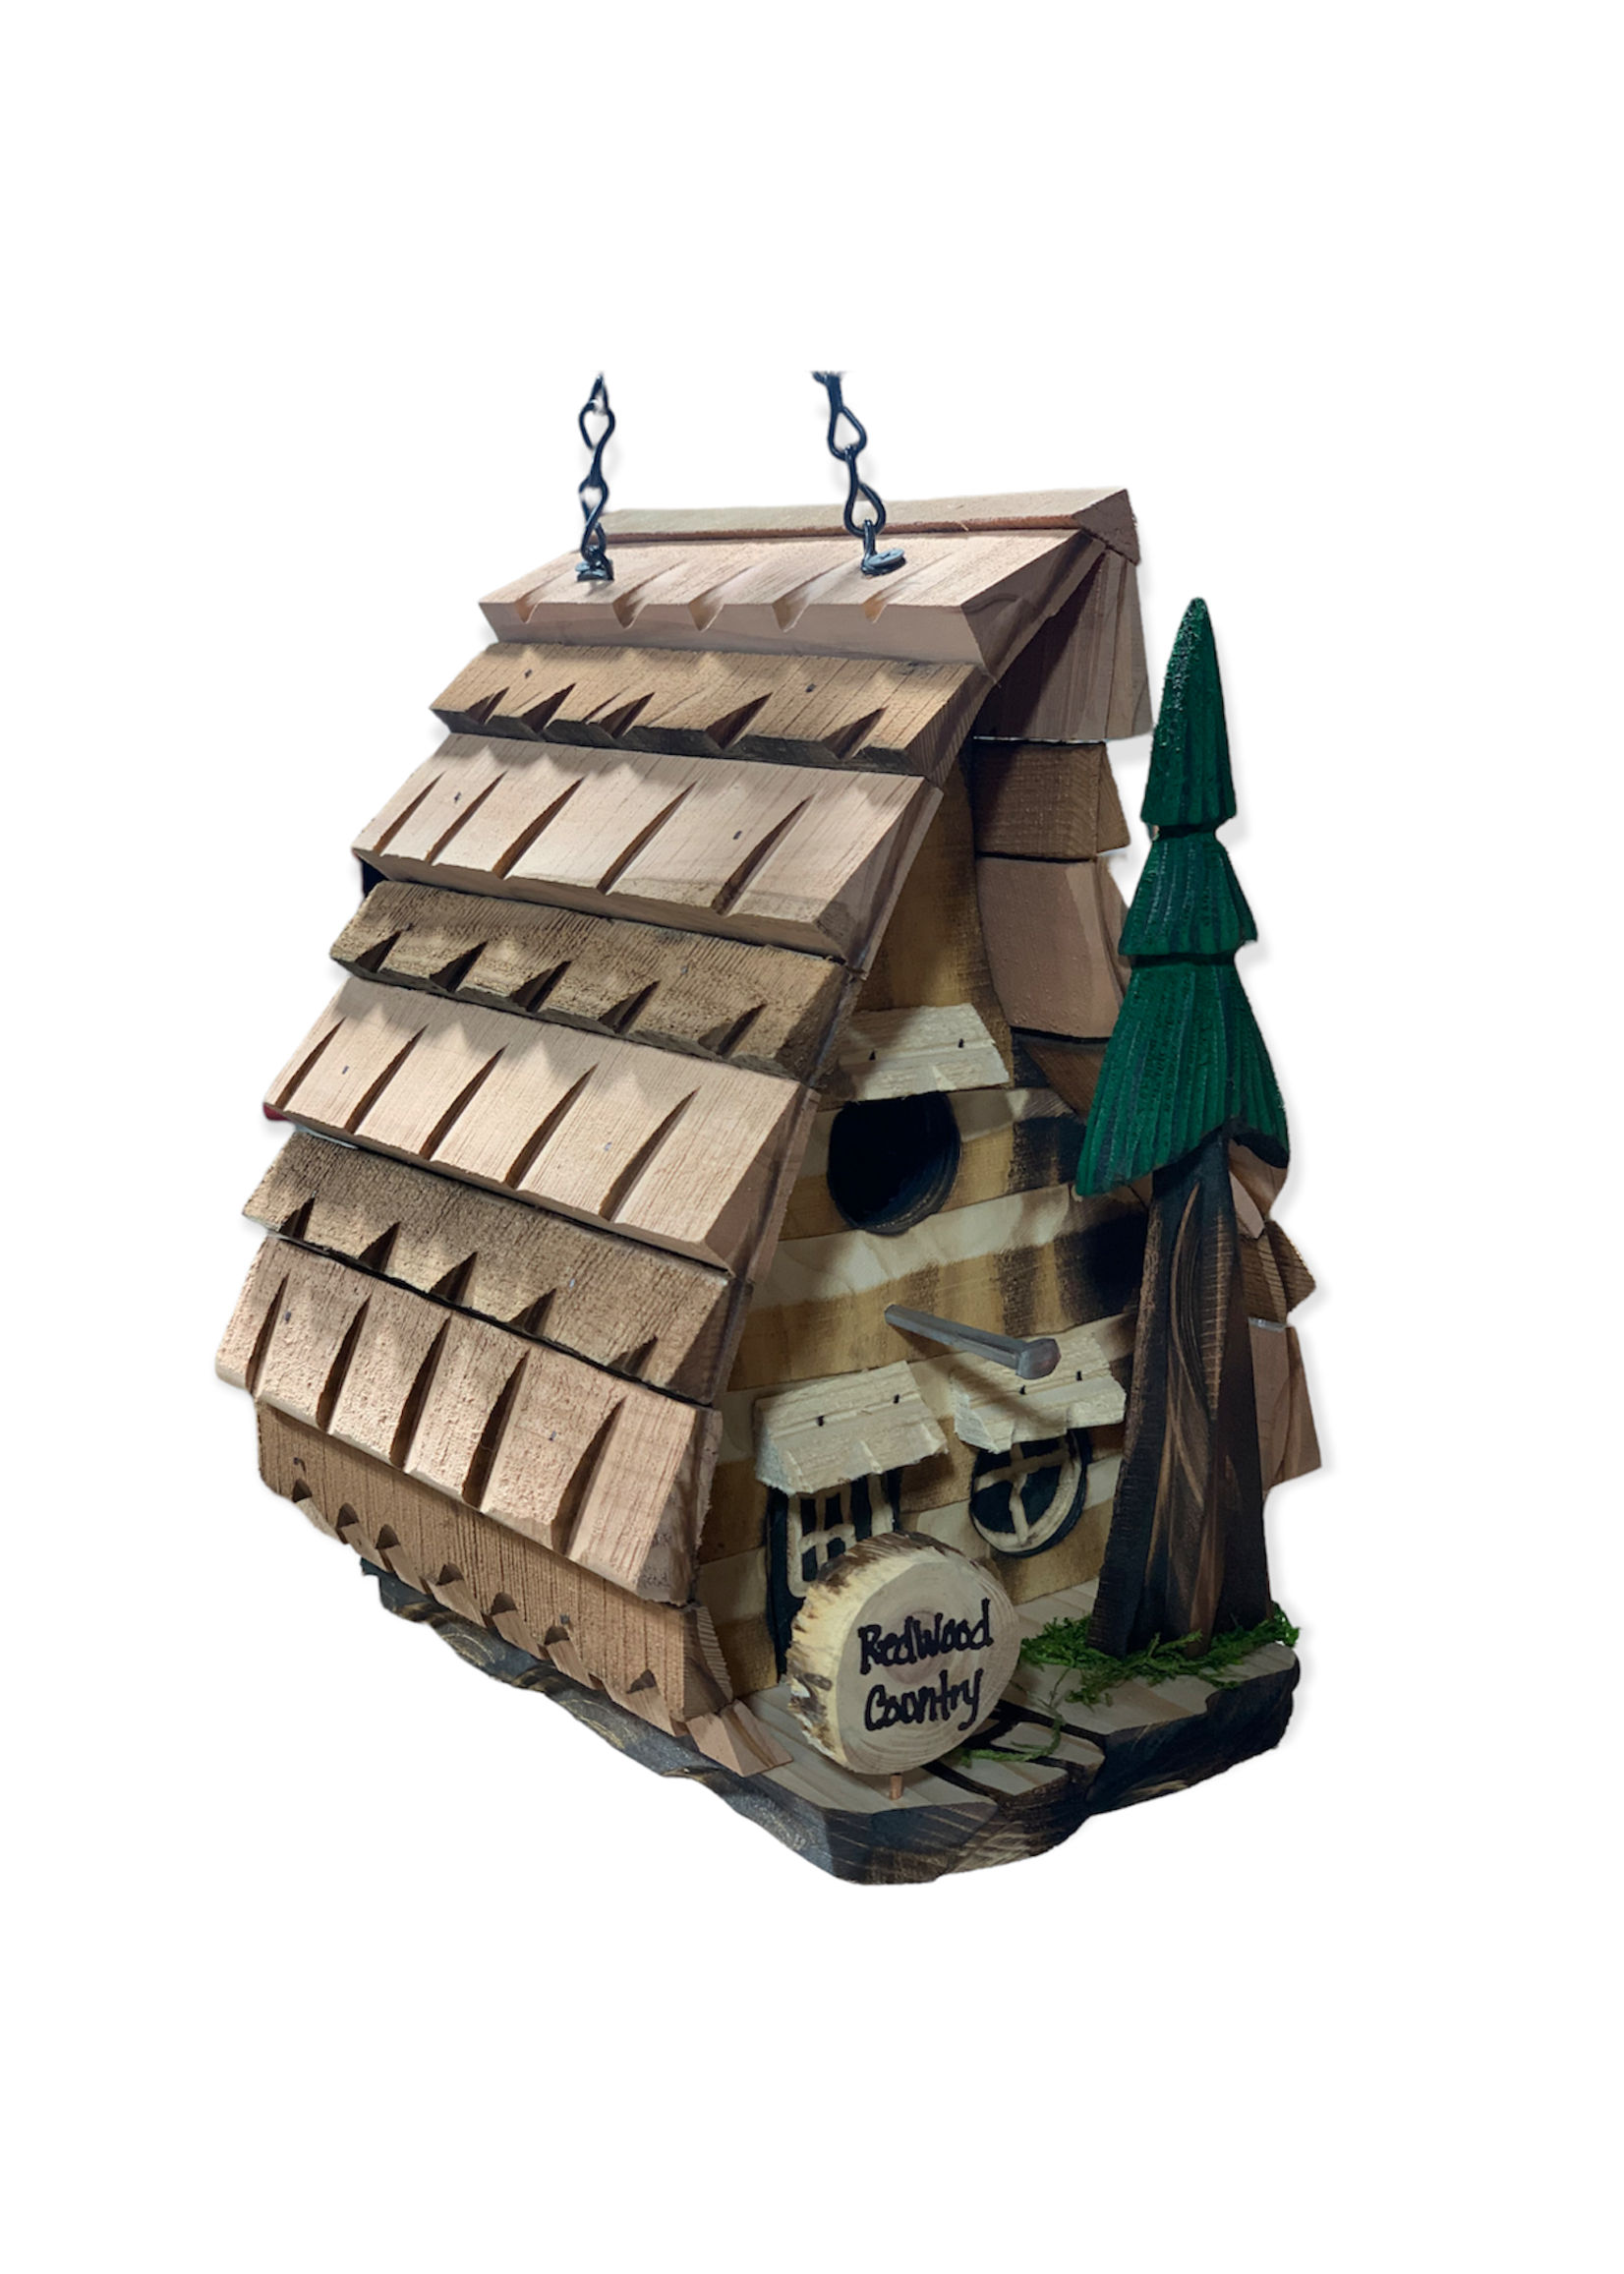 Made in Humboldt Redwood Birdhouse (Gnome)